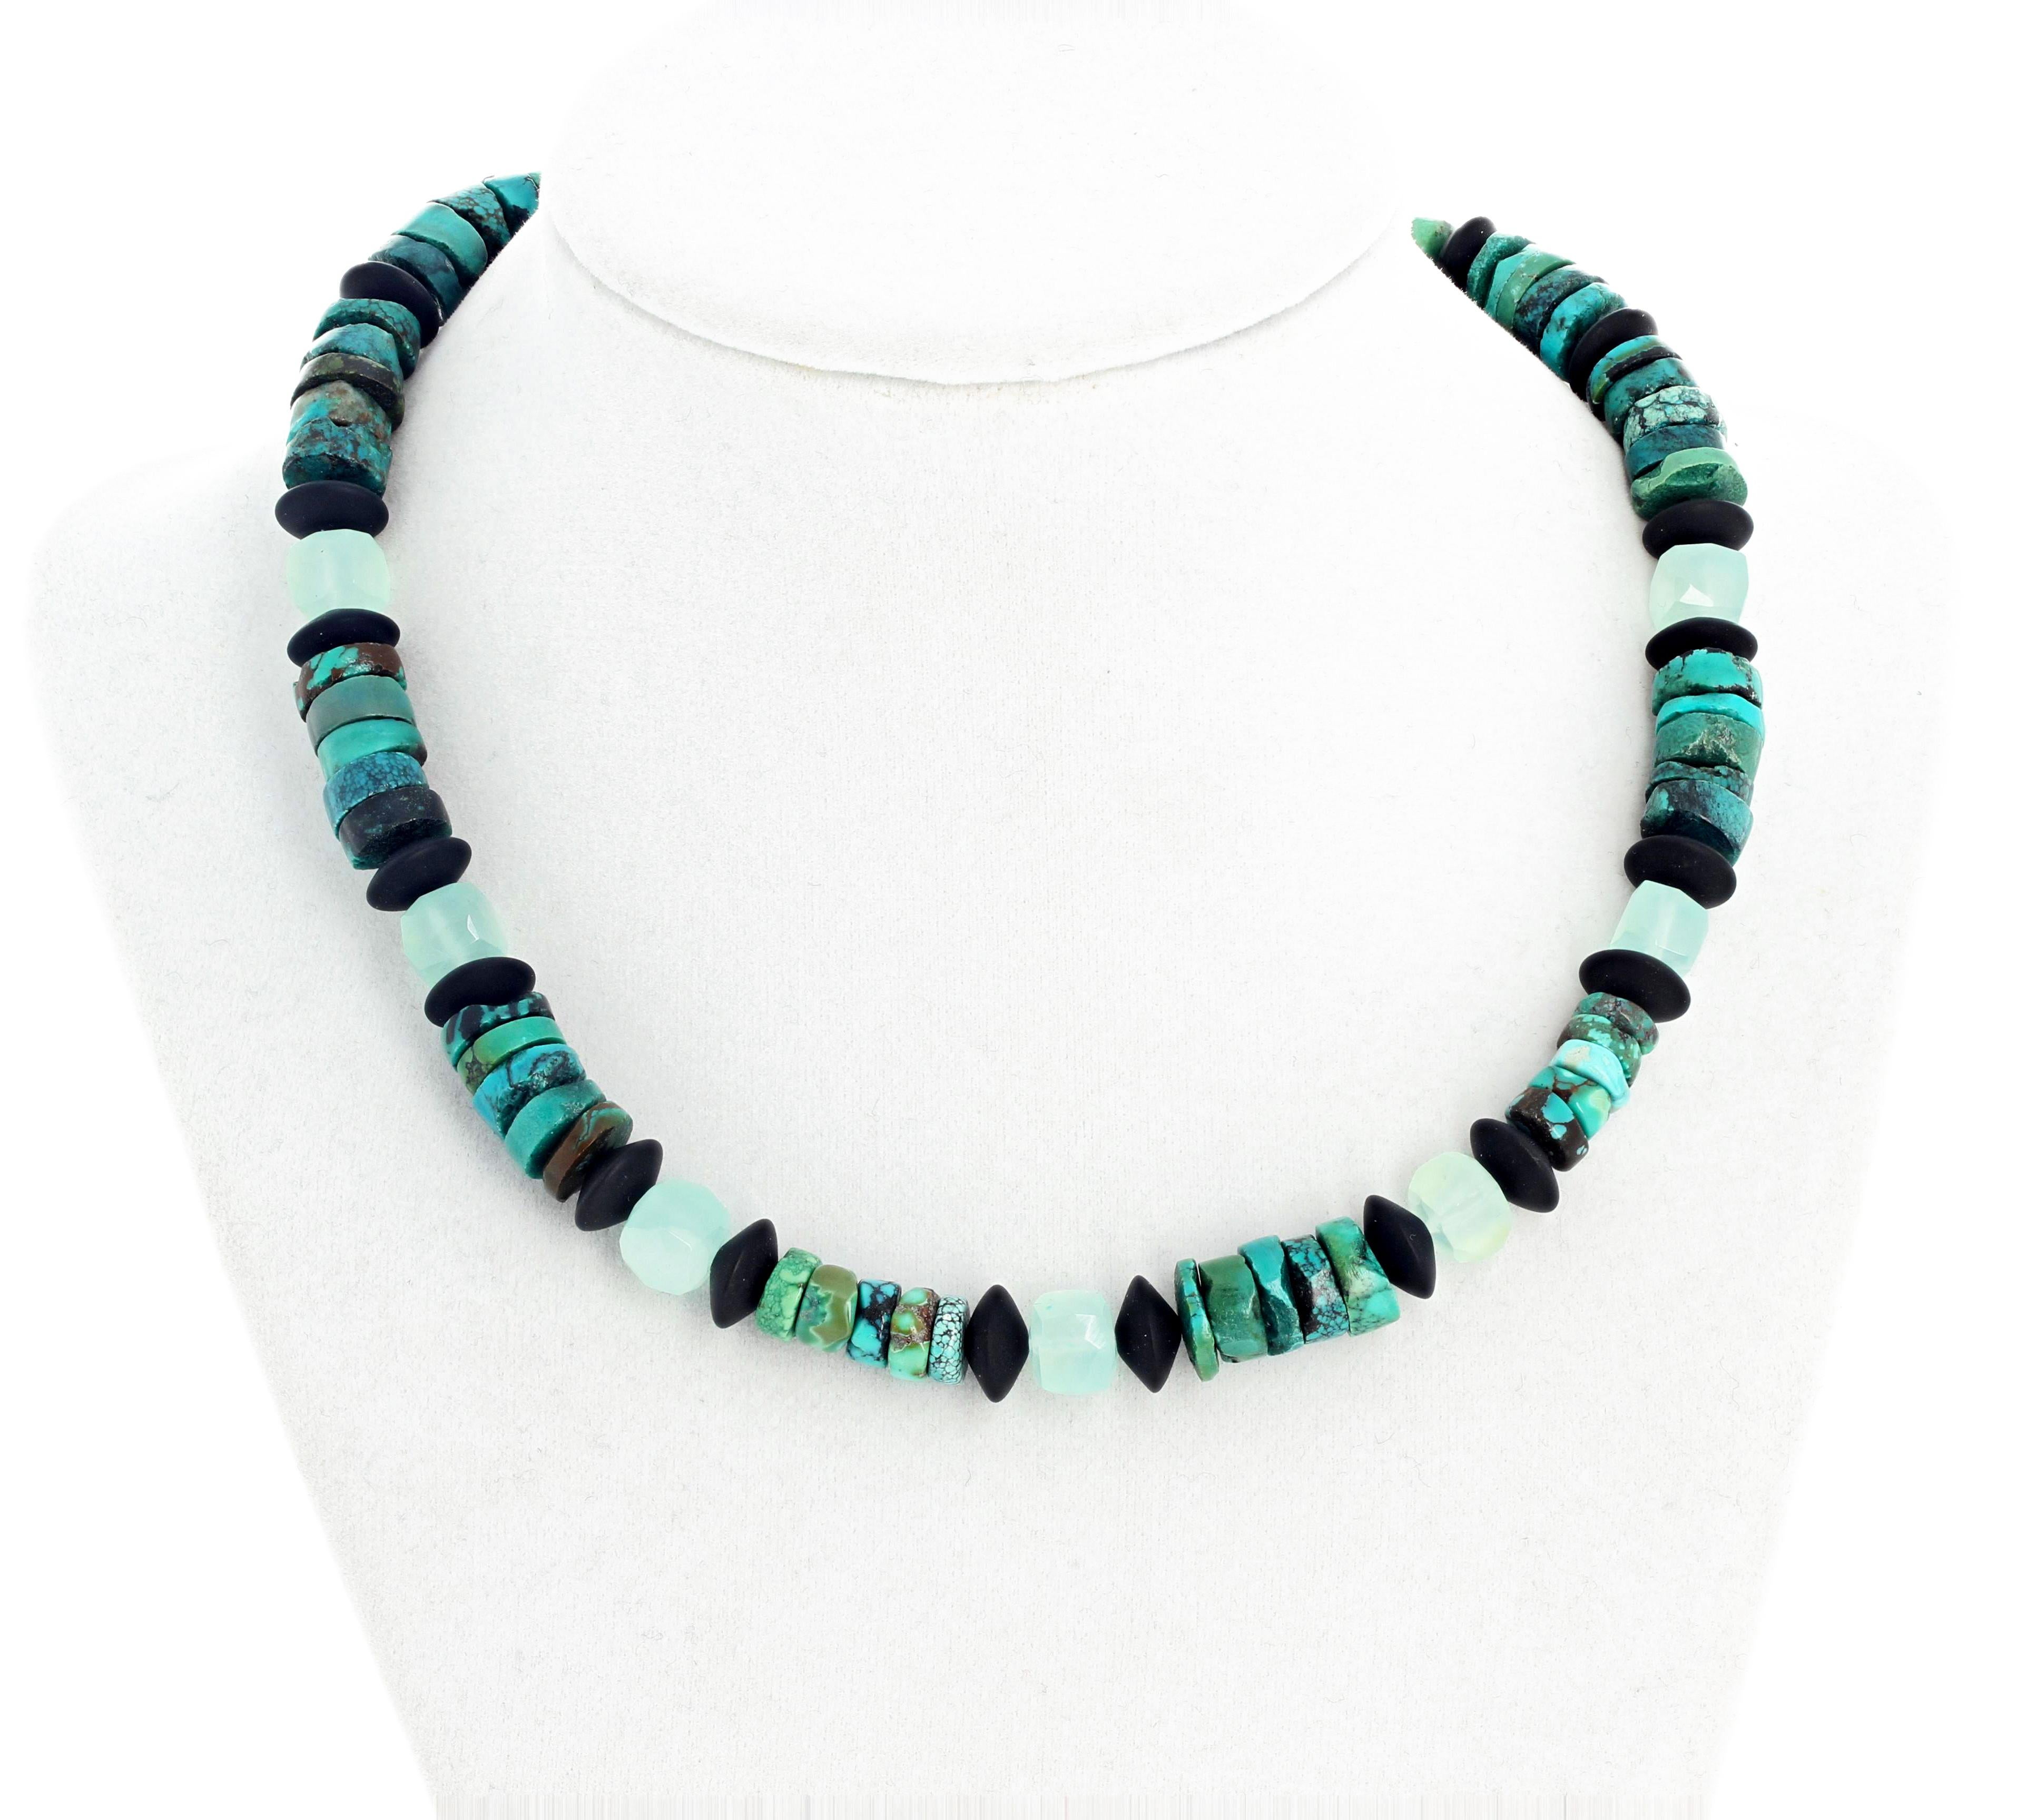 Glowing delicate beautiful Mexican Turquoise (10 mm approximately) polished slices enhanced with Black Onyx and Blue Quartz necklace.  This handmade necklace is 16 inches long with a hook clasp.  